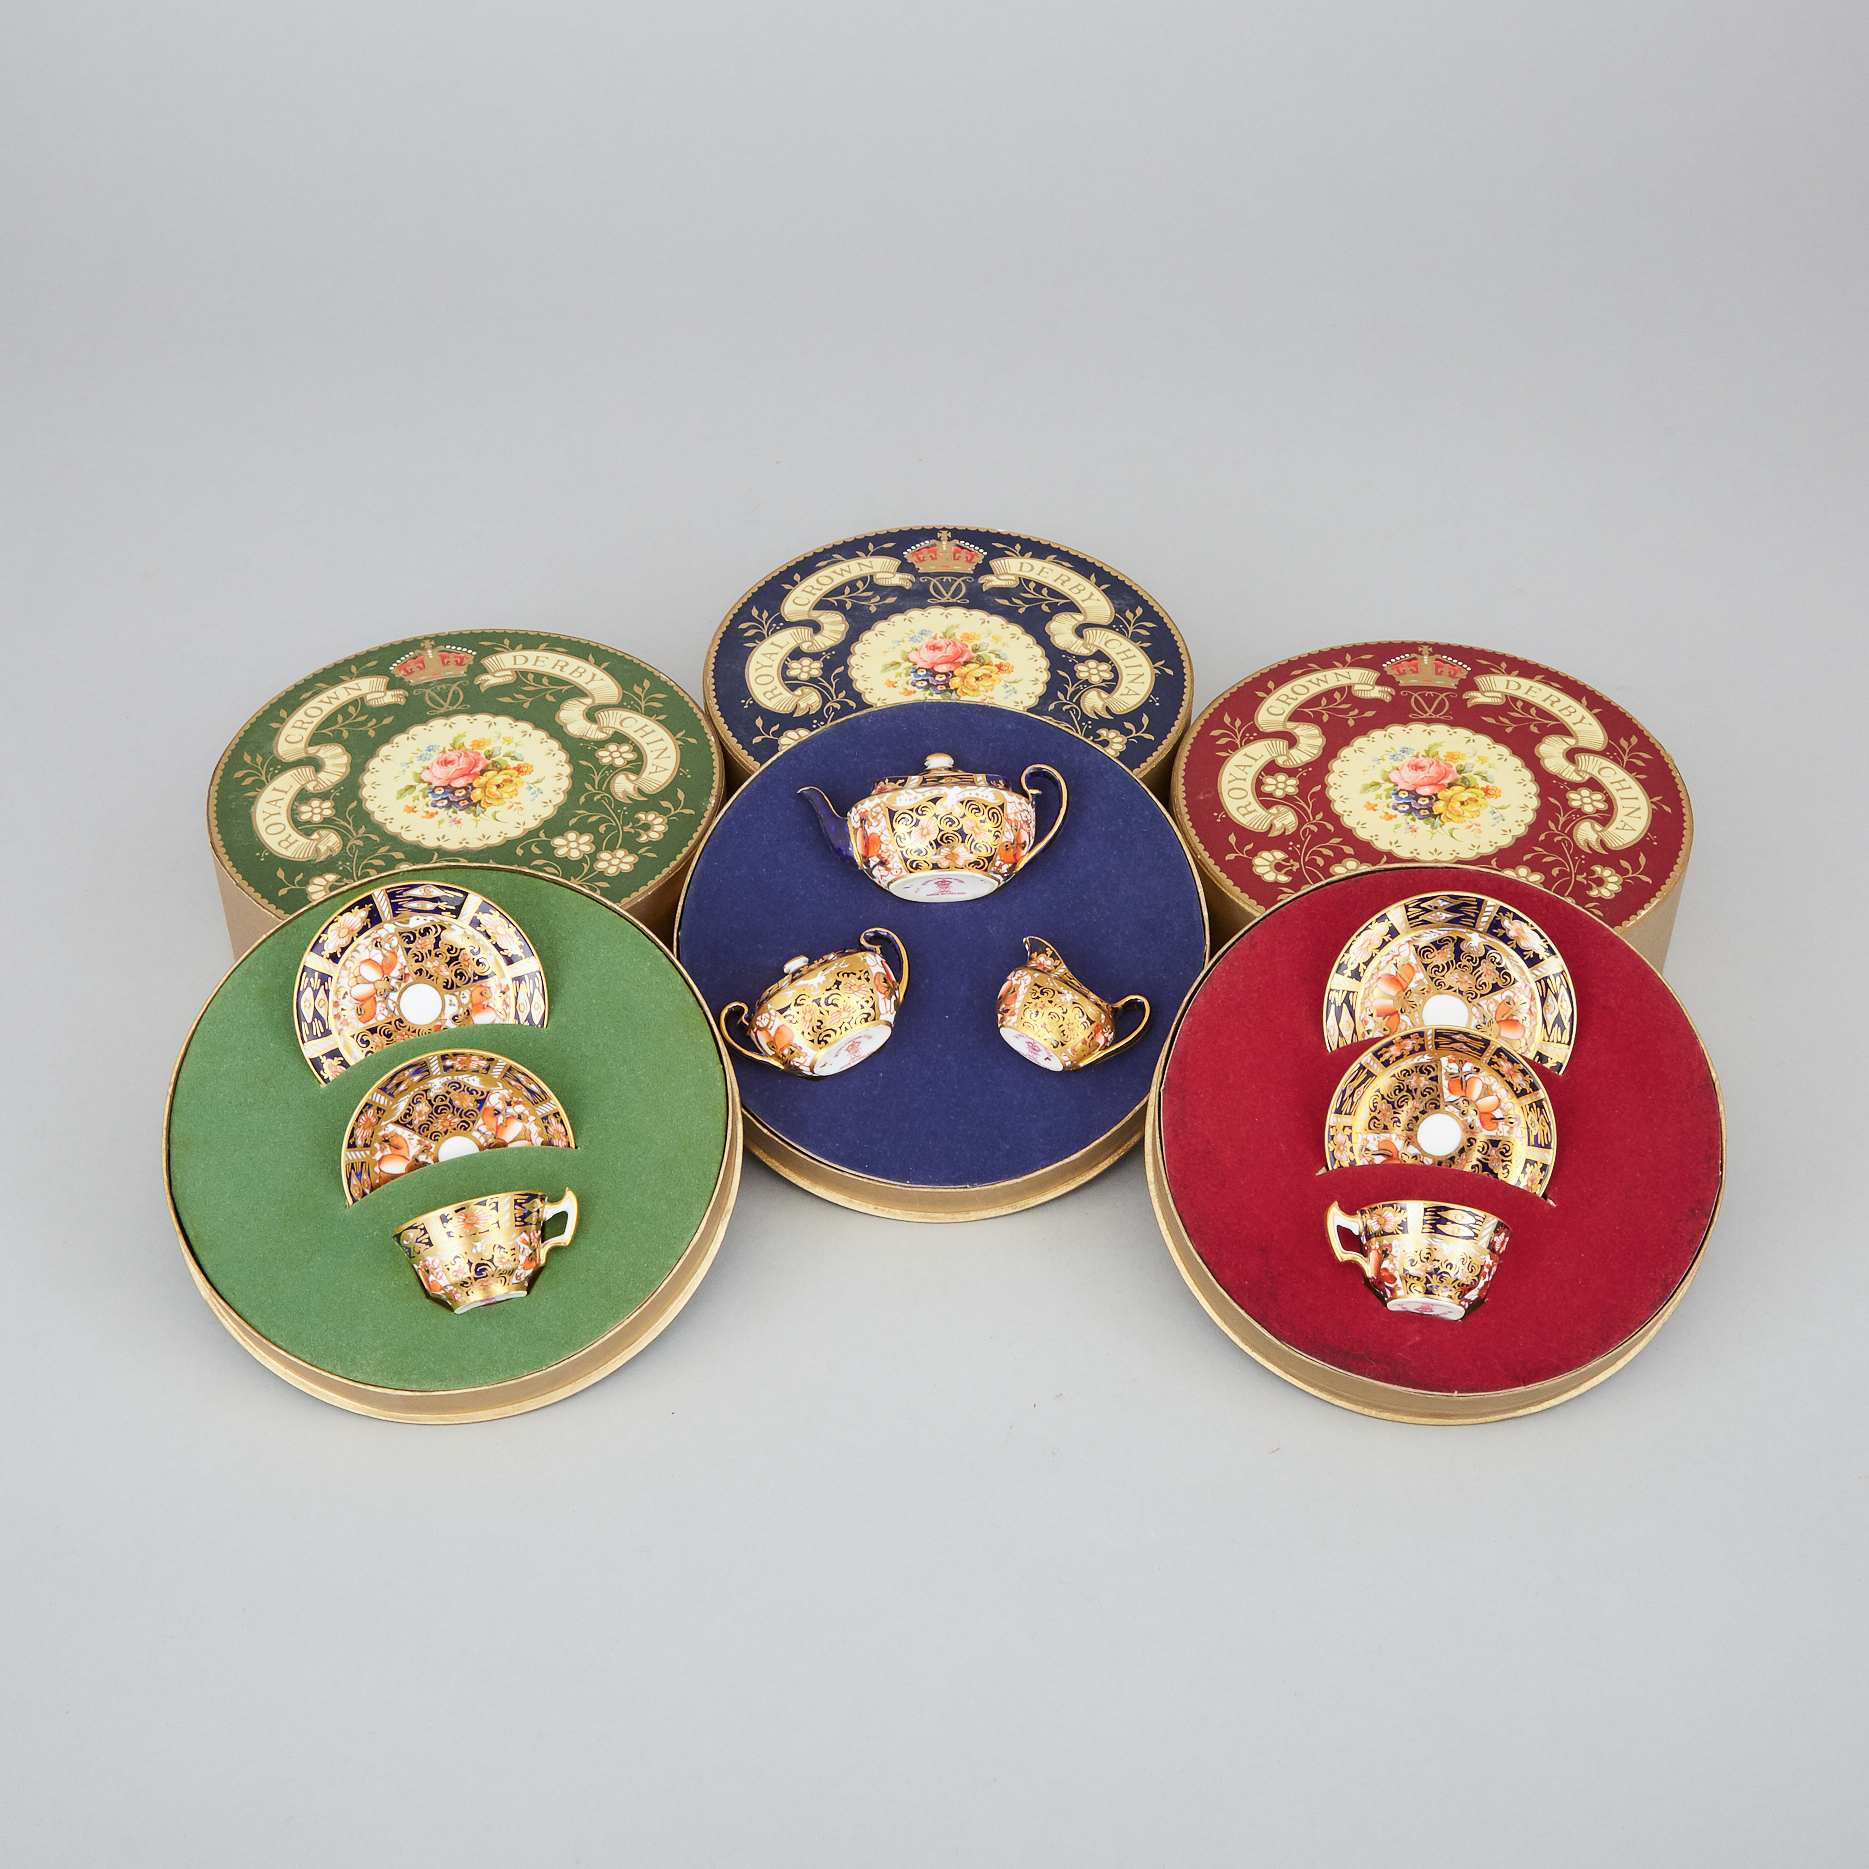 Royal Crown Derby 'Imari' (2451) Pattern Miniature Three-Piece Tea Service, Two Cups and Saucers and Two Plates, 20th century